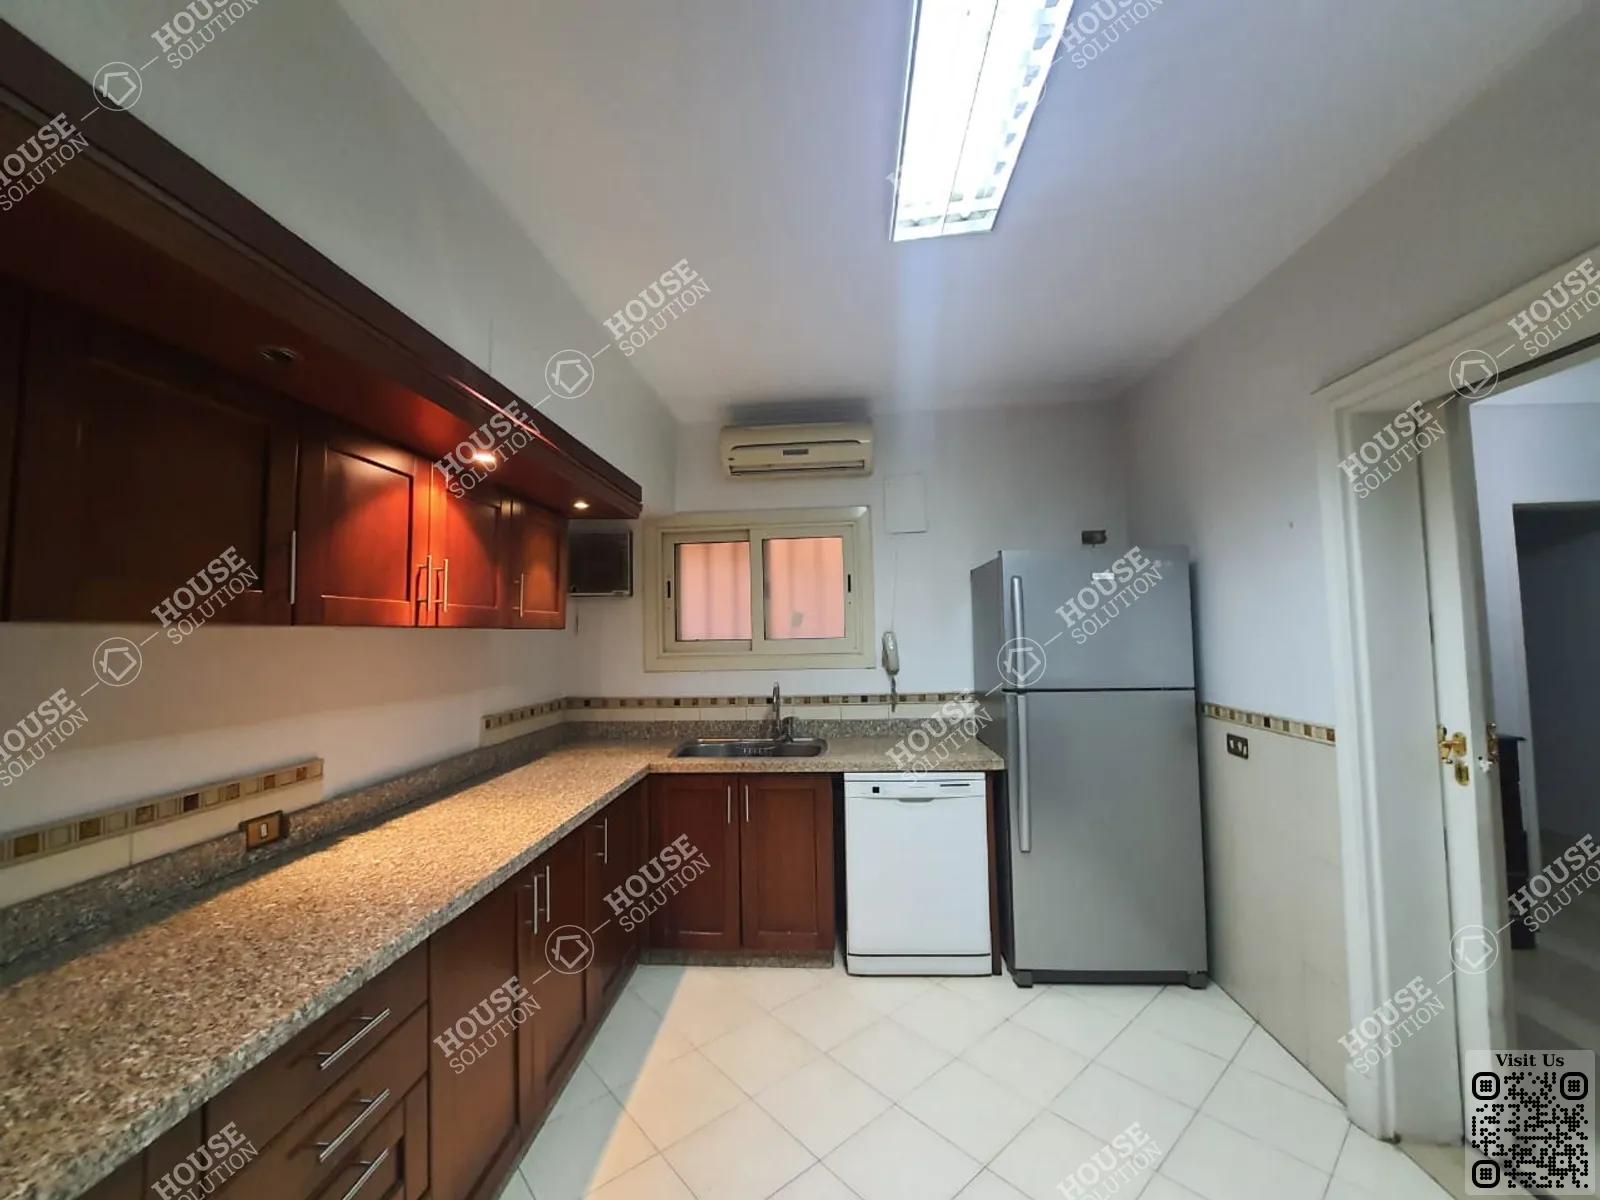 KITCHEN  @ Apartments For Rent In Maadi Maadi Degla Area: 300 m² consists of 4 Bedrooms 3 Bathrooms Modern furnished 5 stars #3245-1